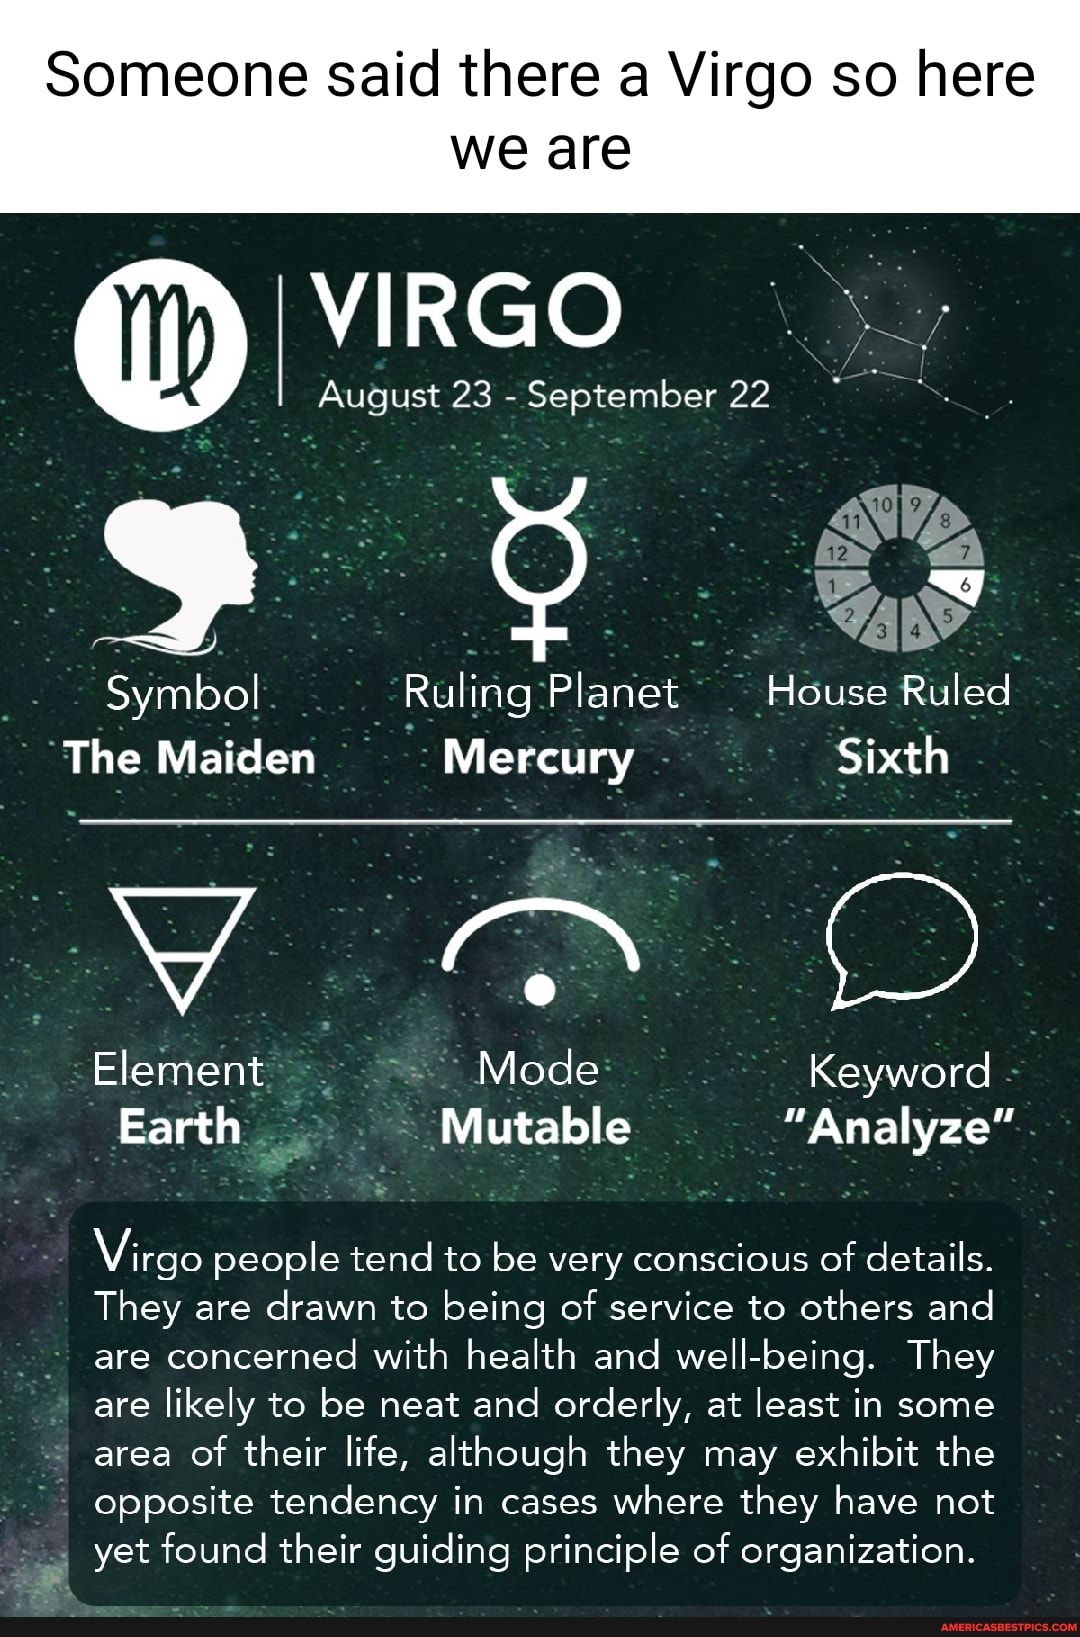 Why are virgo so